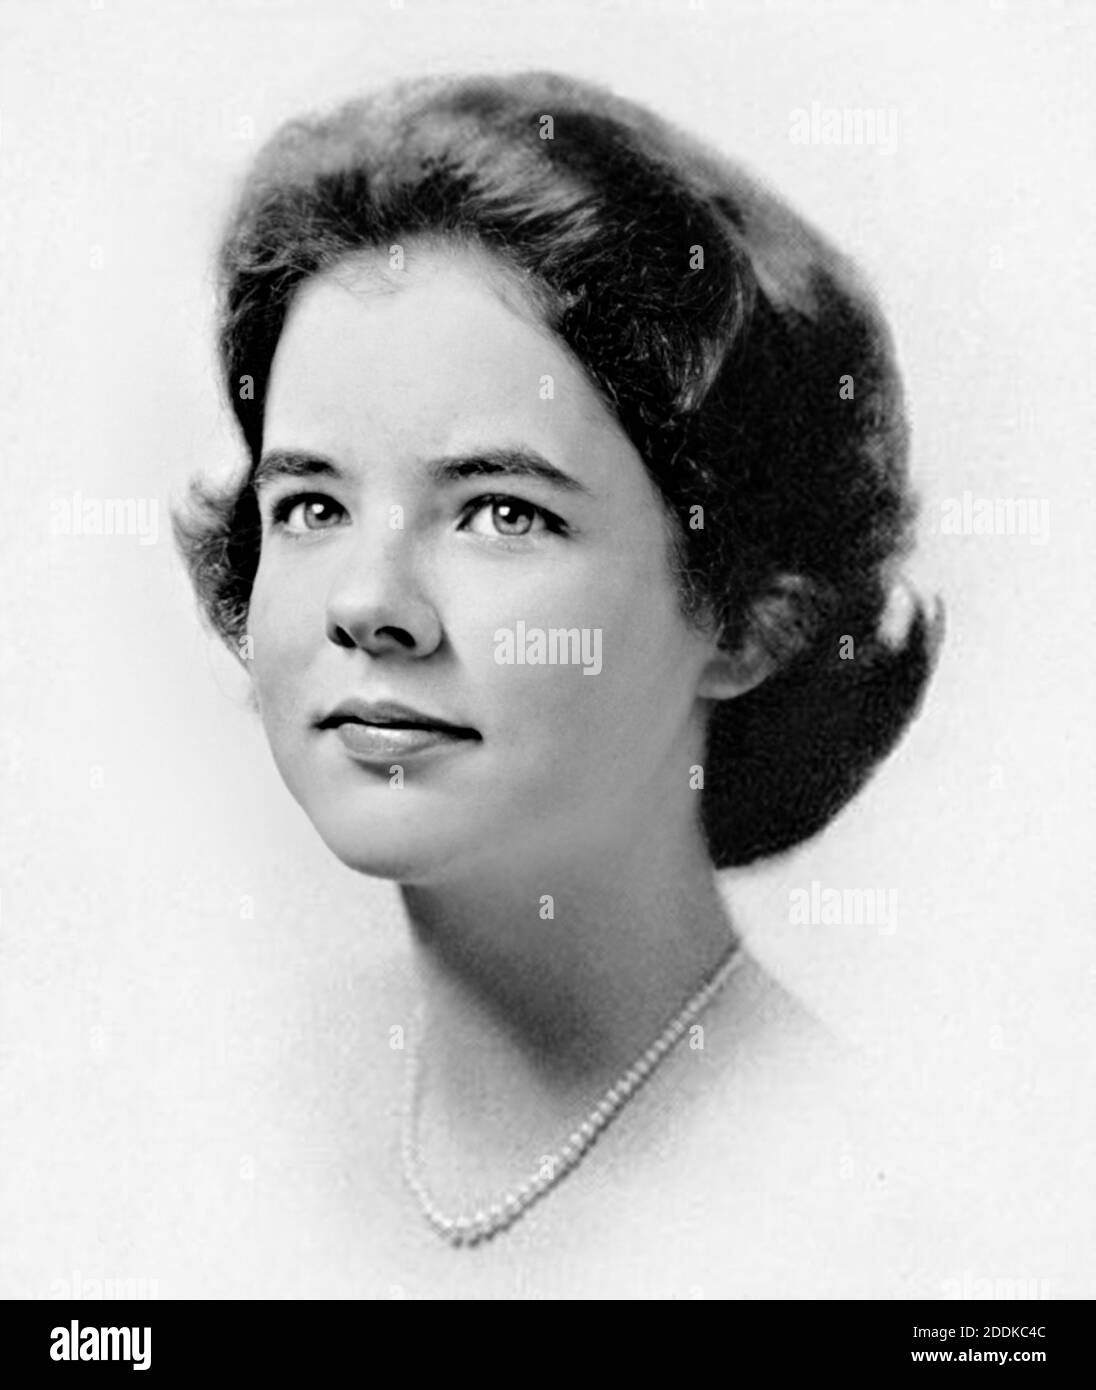 1961 , USA : The celebrated american actress STOCKARD CHANNING ( Susan Williams Stockard , born in New York , 13 february 1944 ) when was a young girl aged 17 , Senior Year at Madeira School , Greenway , VA . Unknown photographer , photo from yearbook school .- HISTORY - FOTO STORICHE - ATTORE - MOVIE - CINEMA - personalità da bambino bambini da giovane - personality personalities when was young - TEENAGER - INFANZIA - CHILDHOOD - BAMBINO - BAMBINI - RAGAZZA - CHILDREN - CHILD - smile - sorriso --- ARCHIVIO GBB Stock Photo